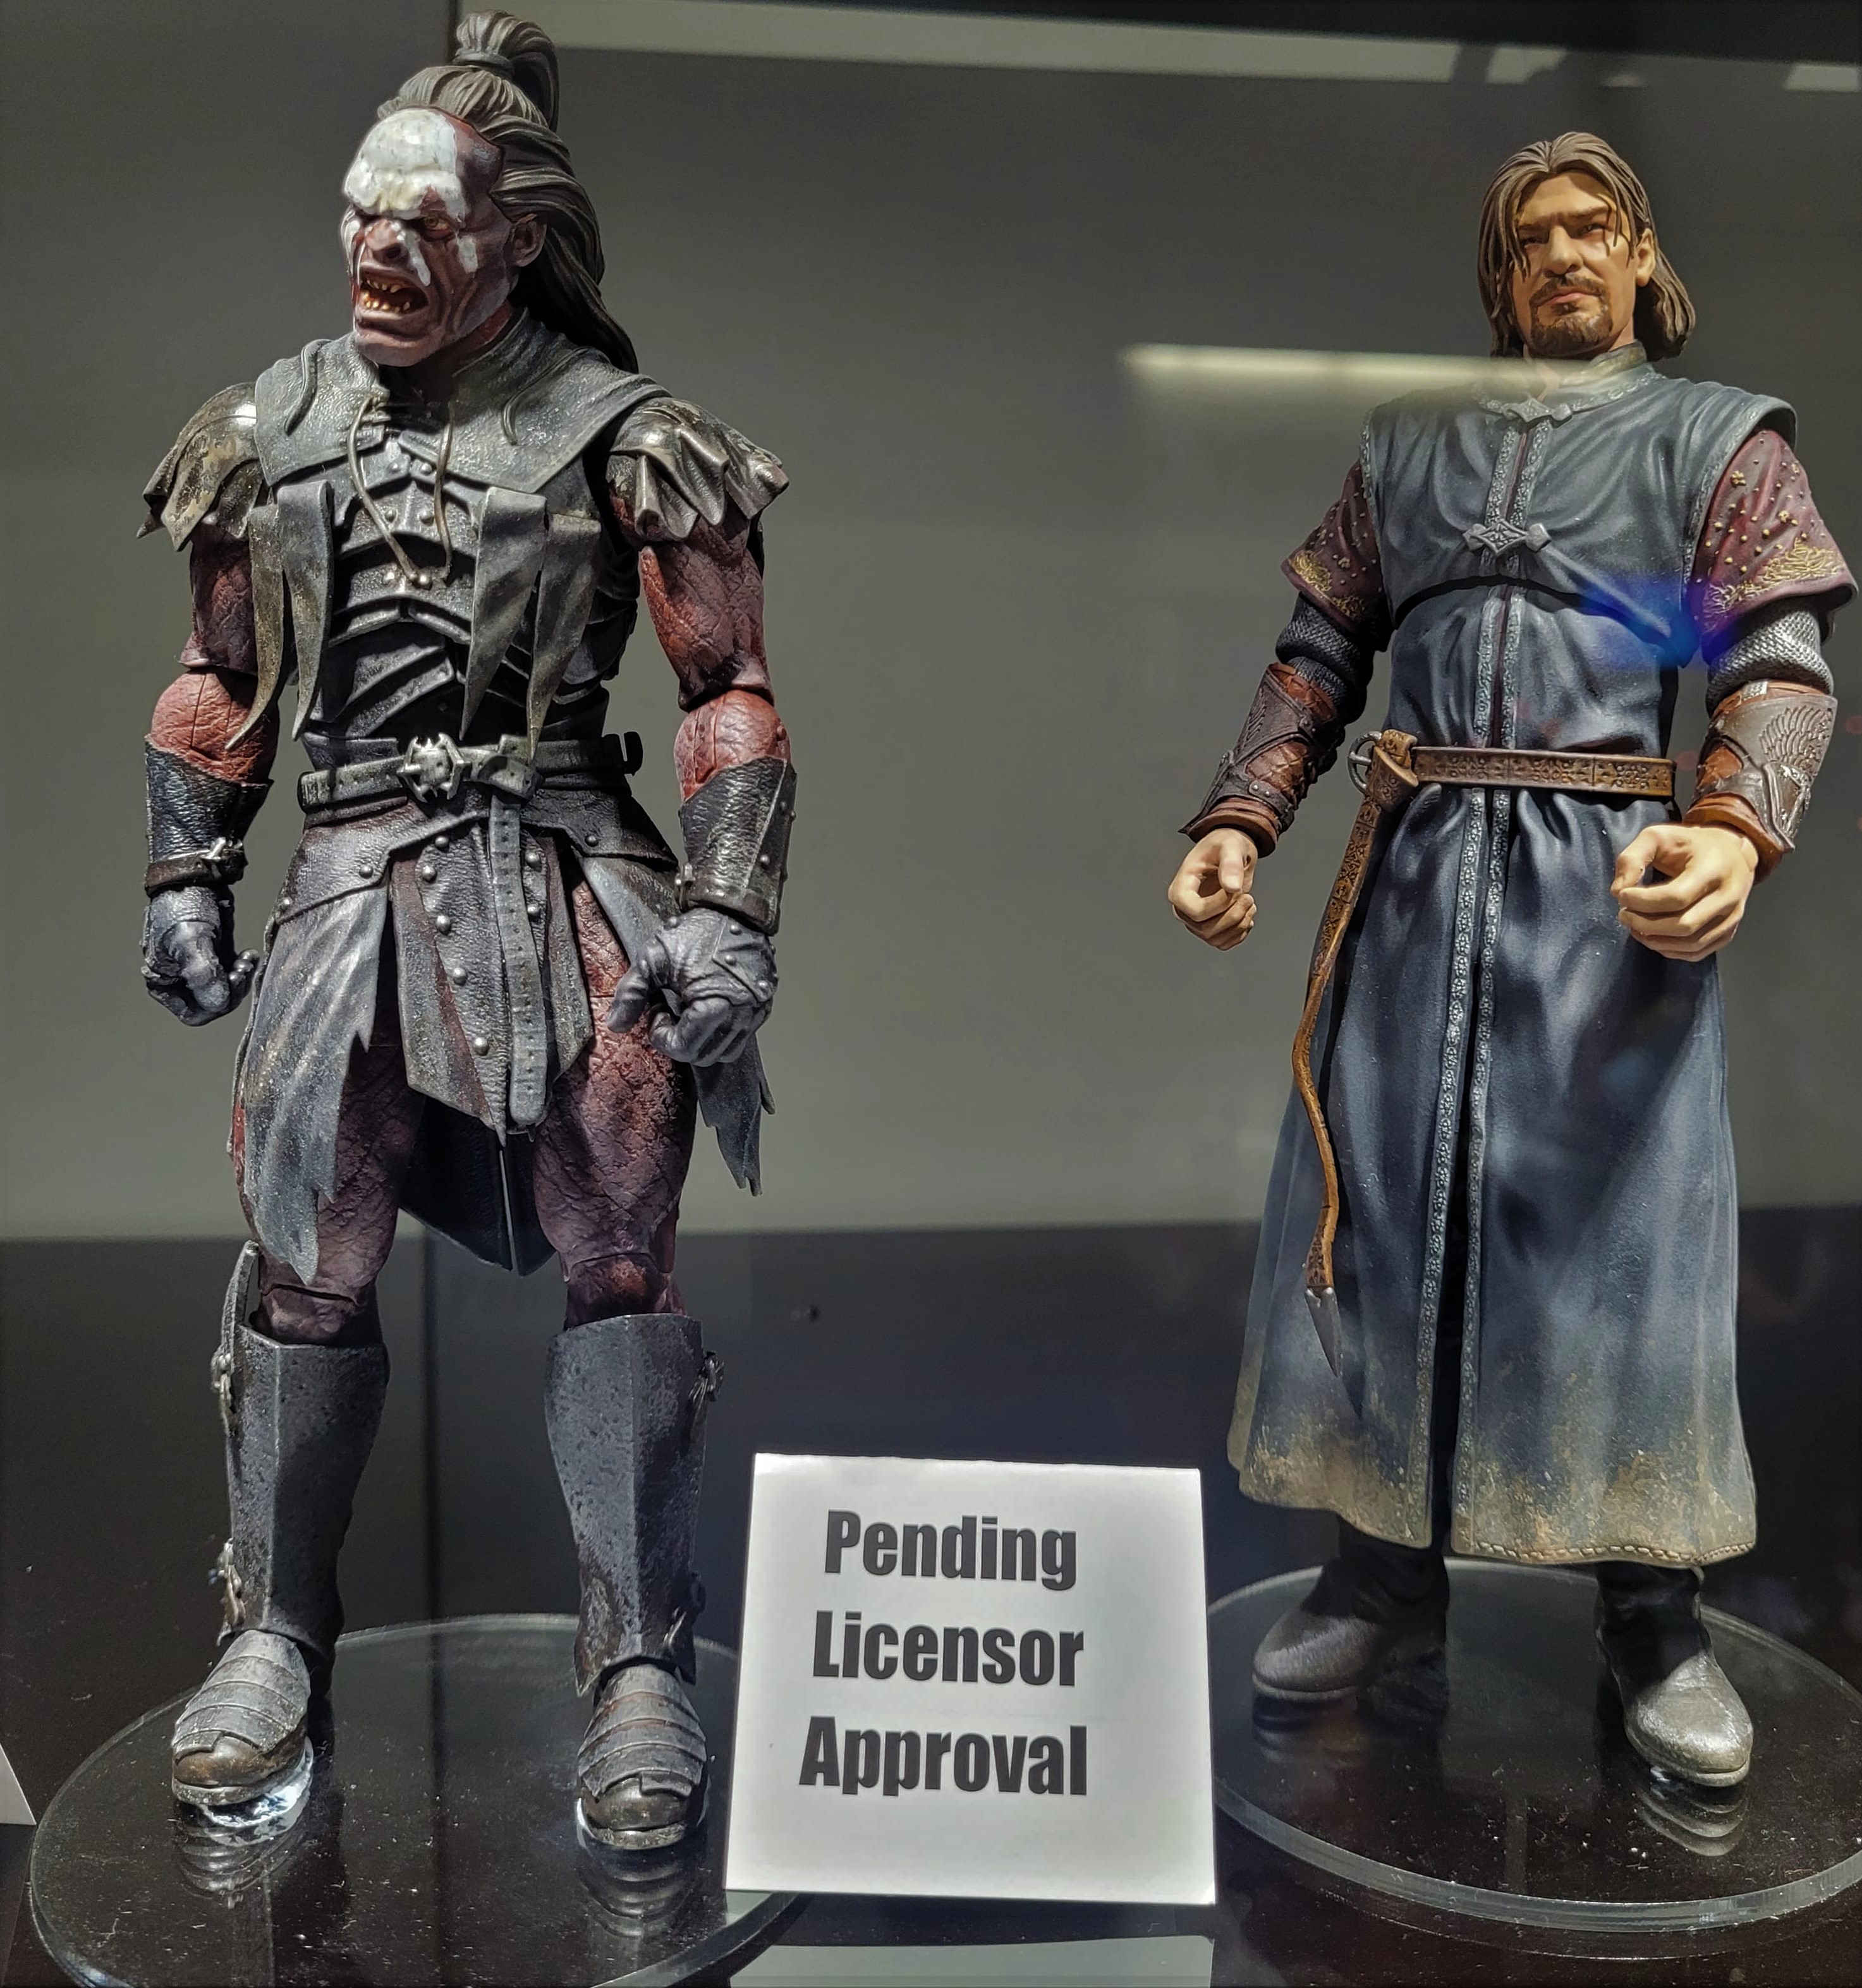 Lord of the Rings action figures